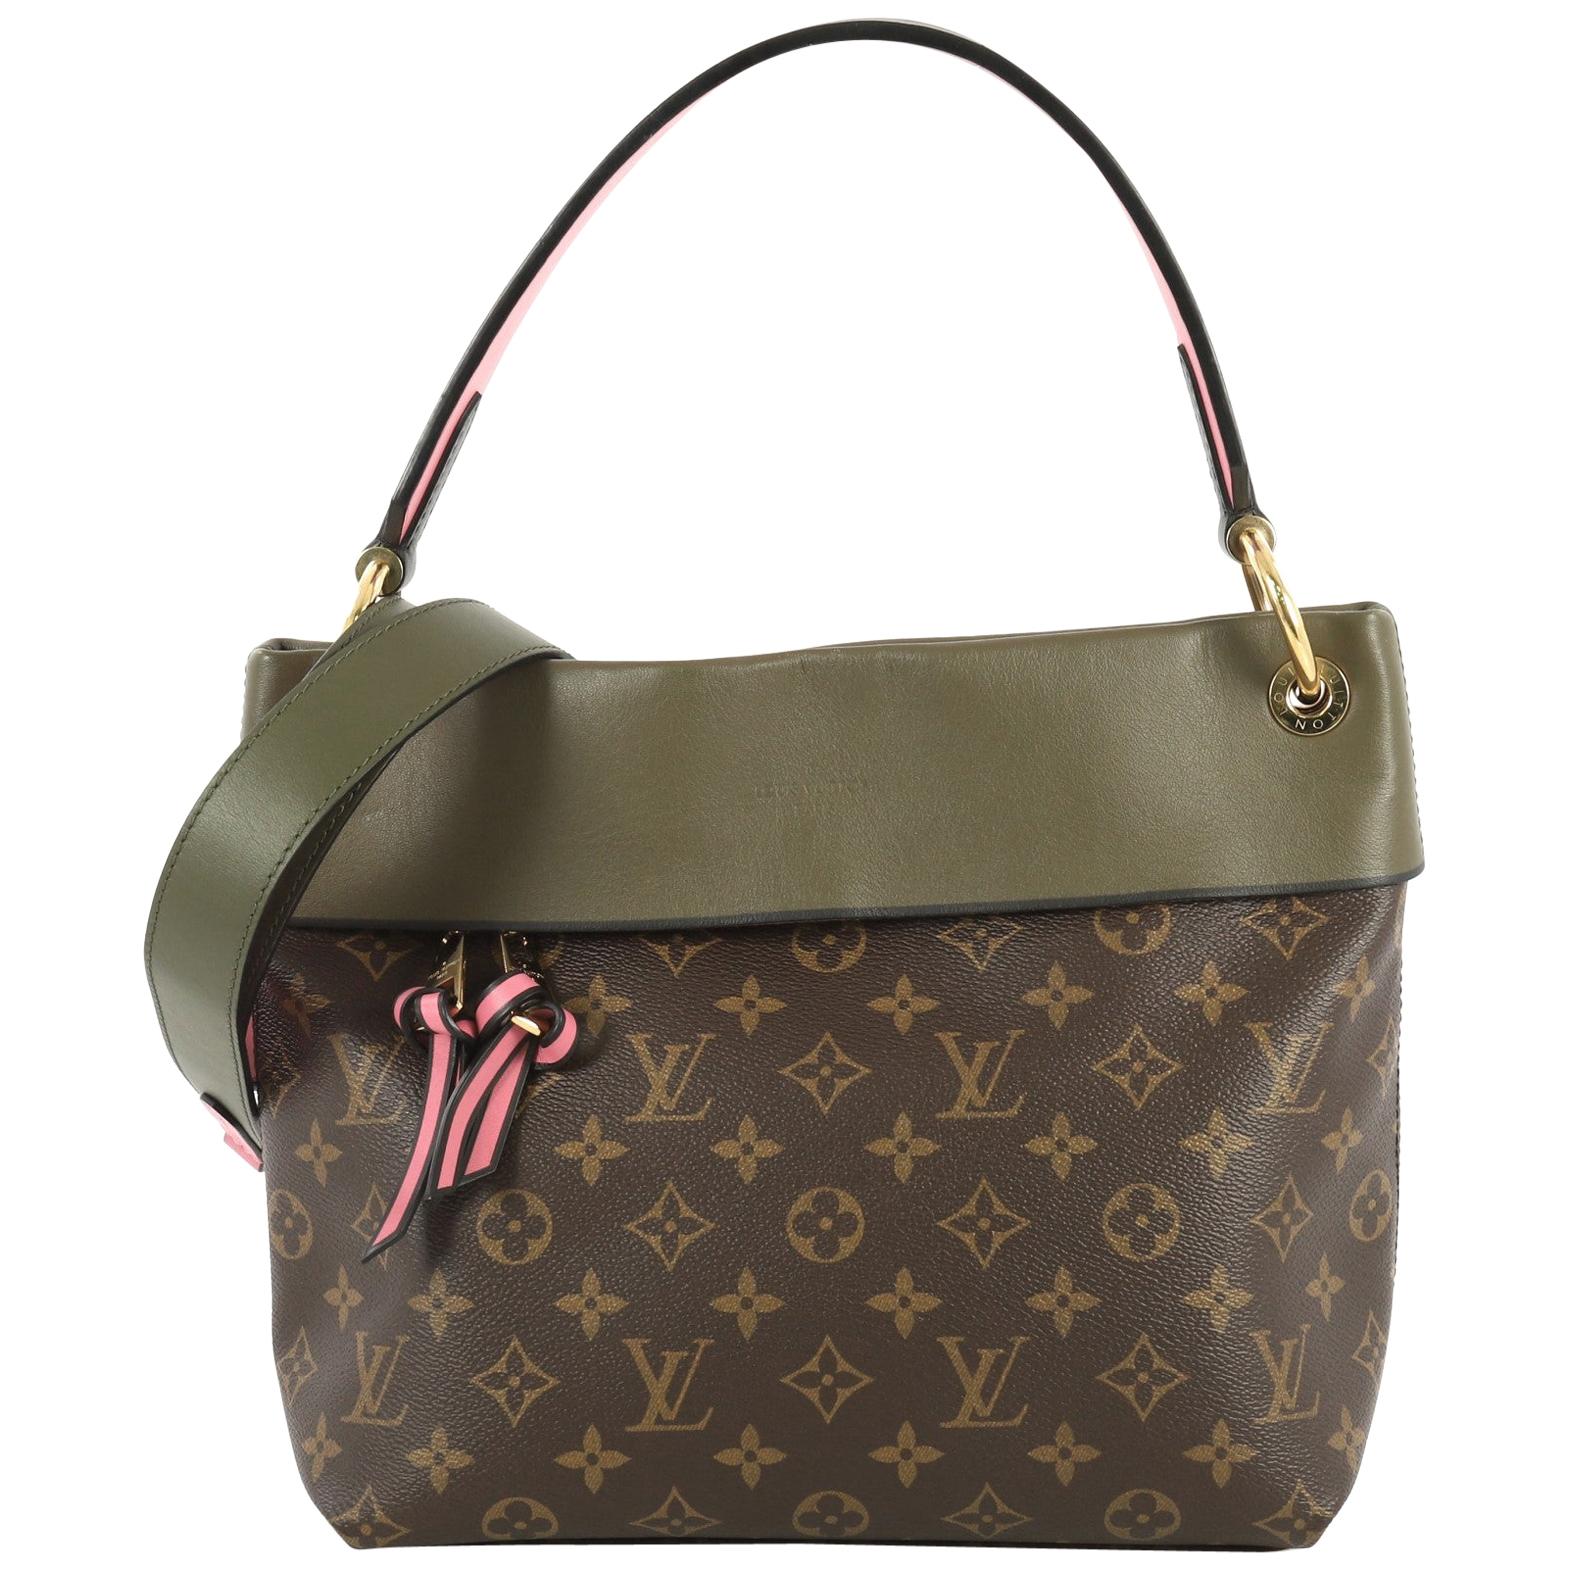 Louis Vuitton Tuileries Besace Bag Monogram Canvas With Leather 